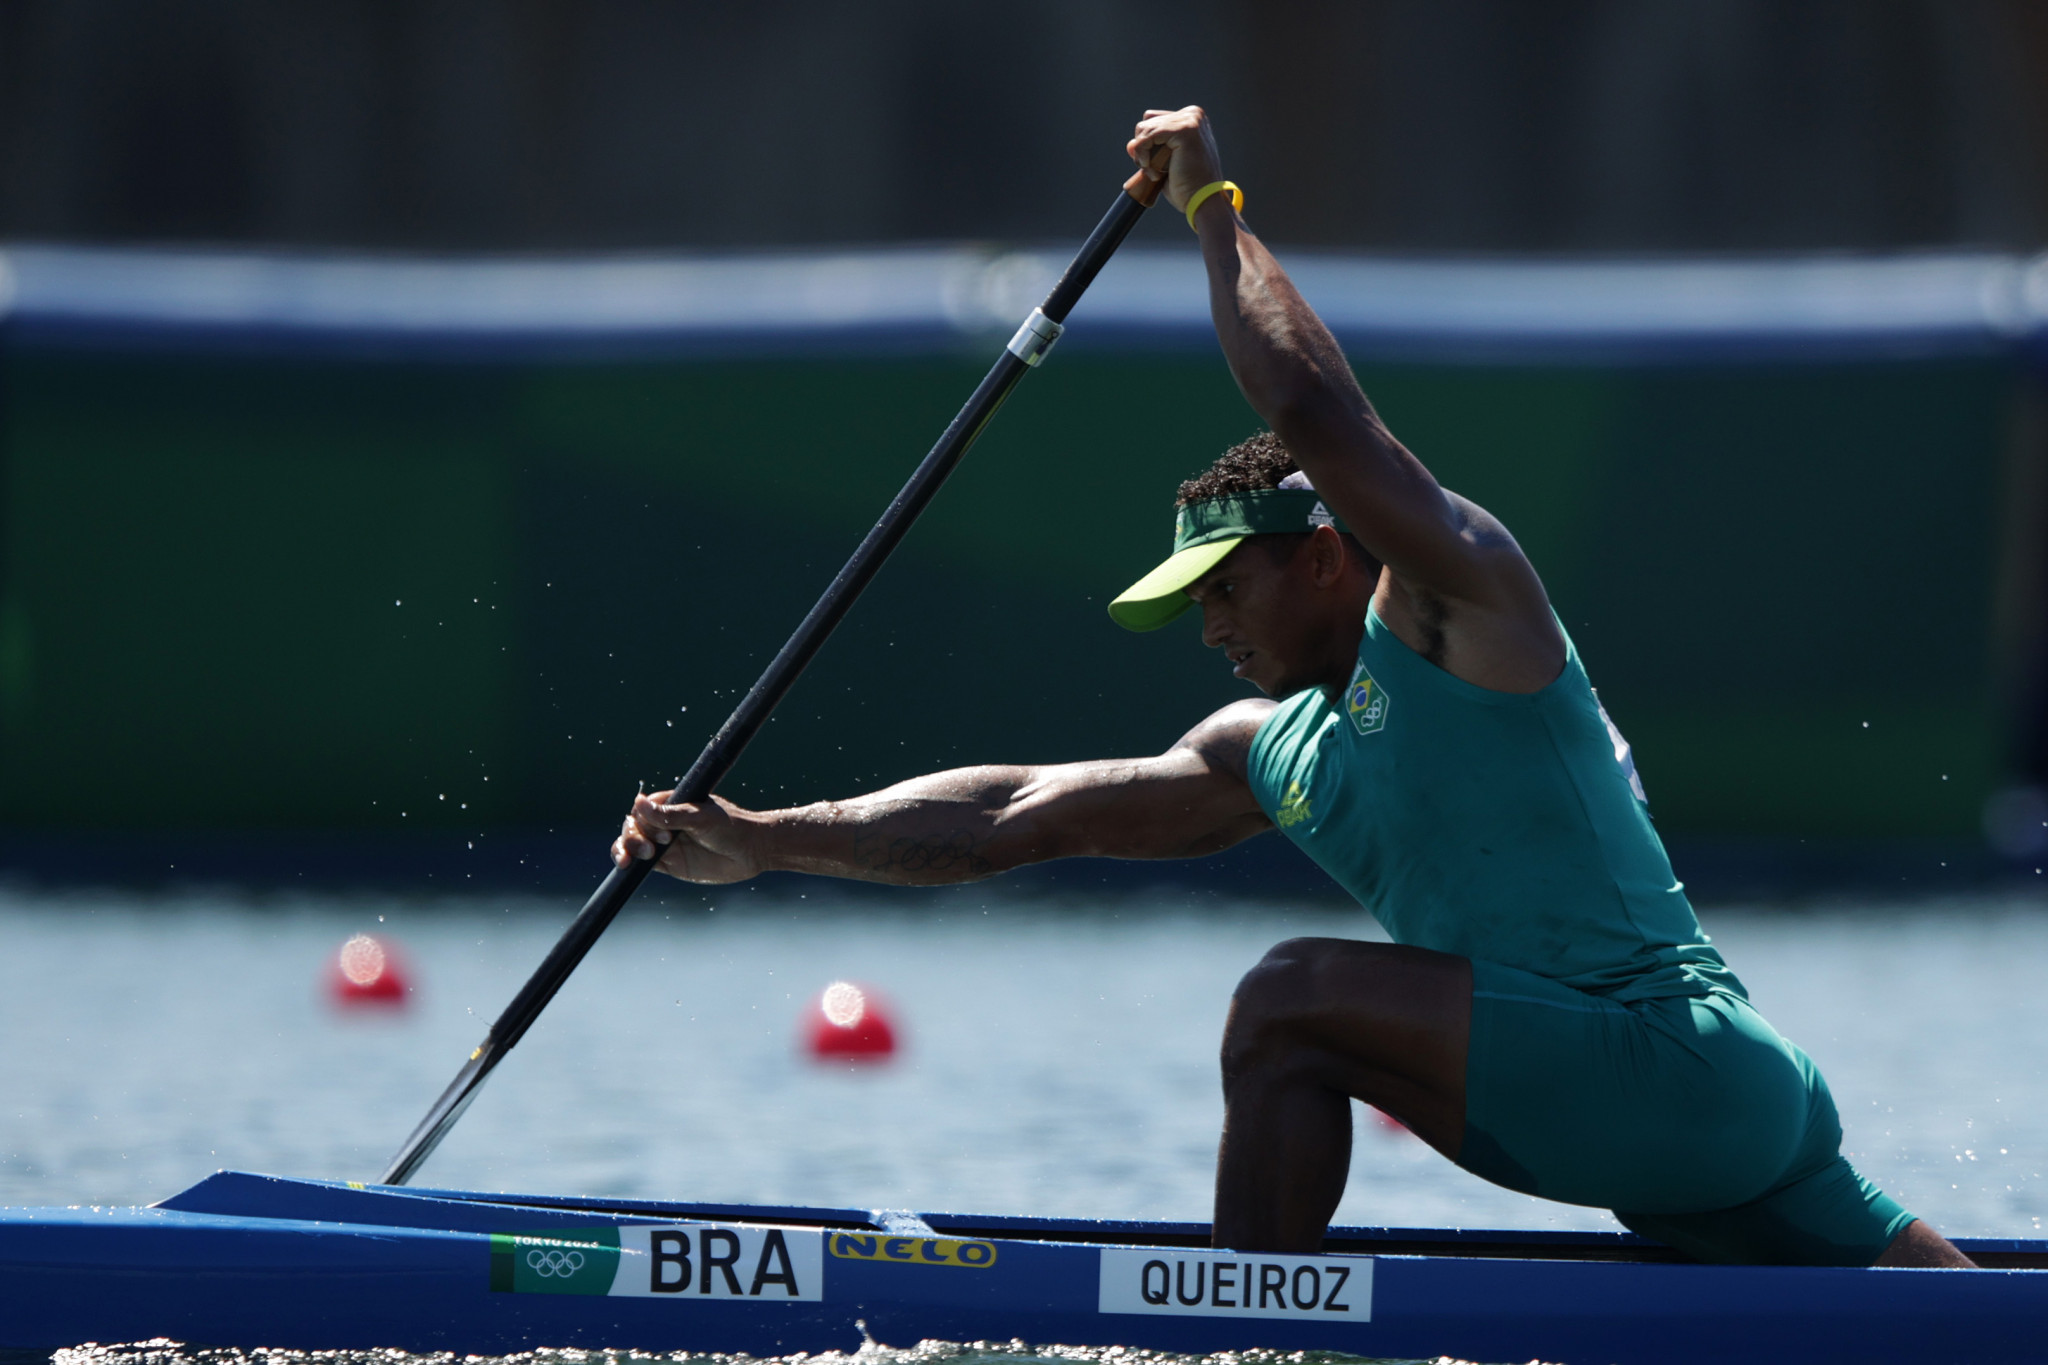 Brazil’s Isaquias dos Santos is through to the men’s C1 1000 final ©Getty Images